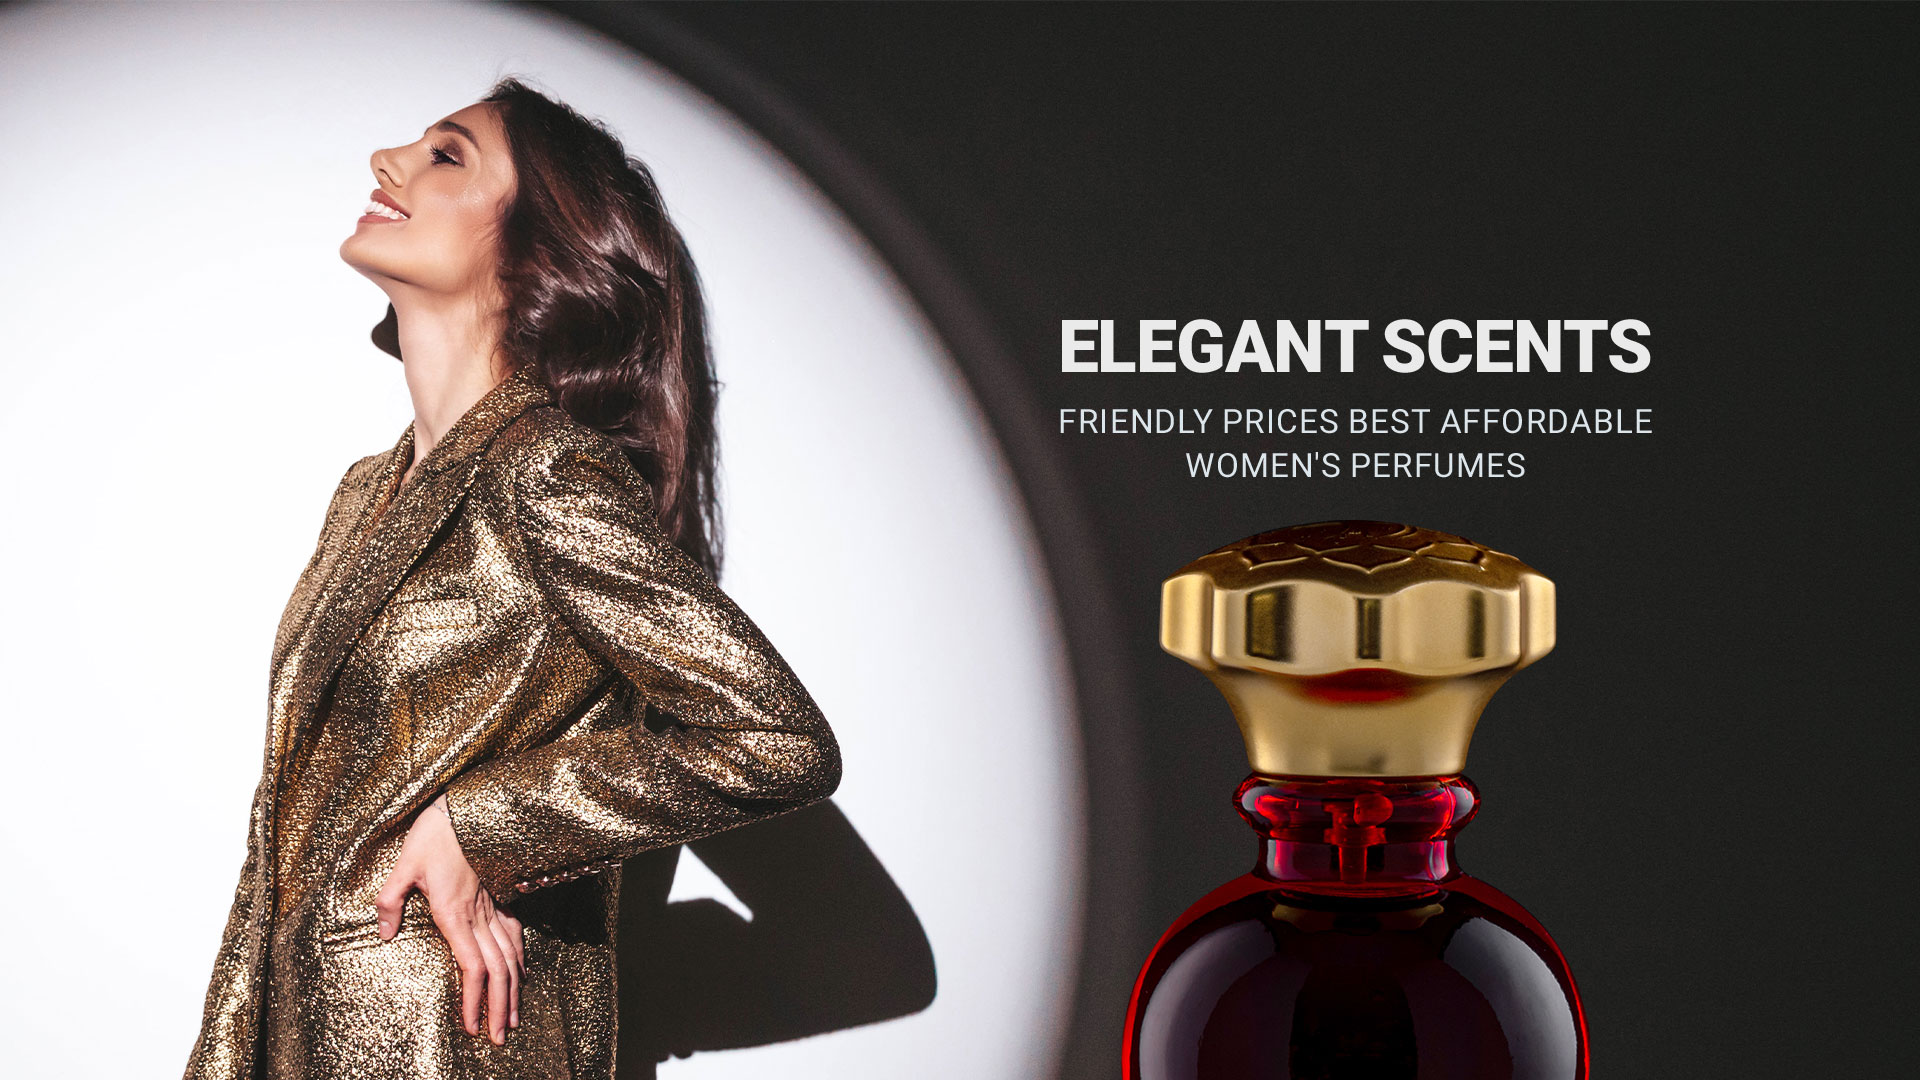 Elegant Scents, Friendly Prices: Best Affordable Women's Perfumes​